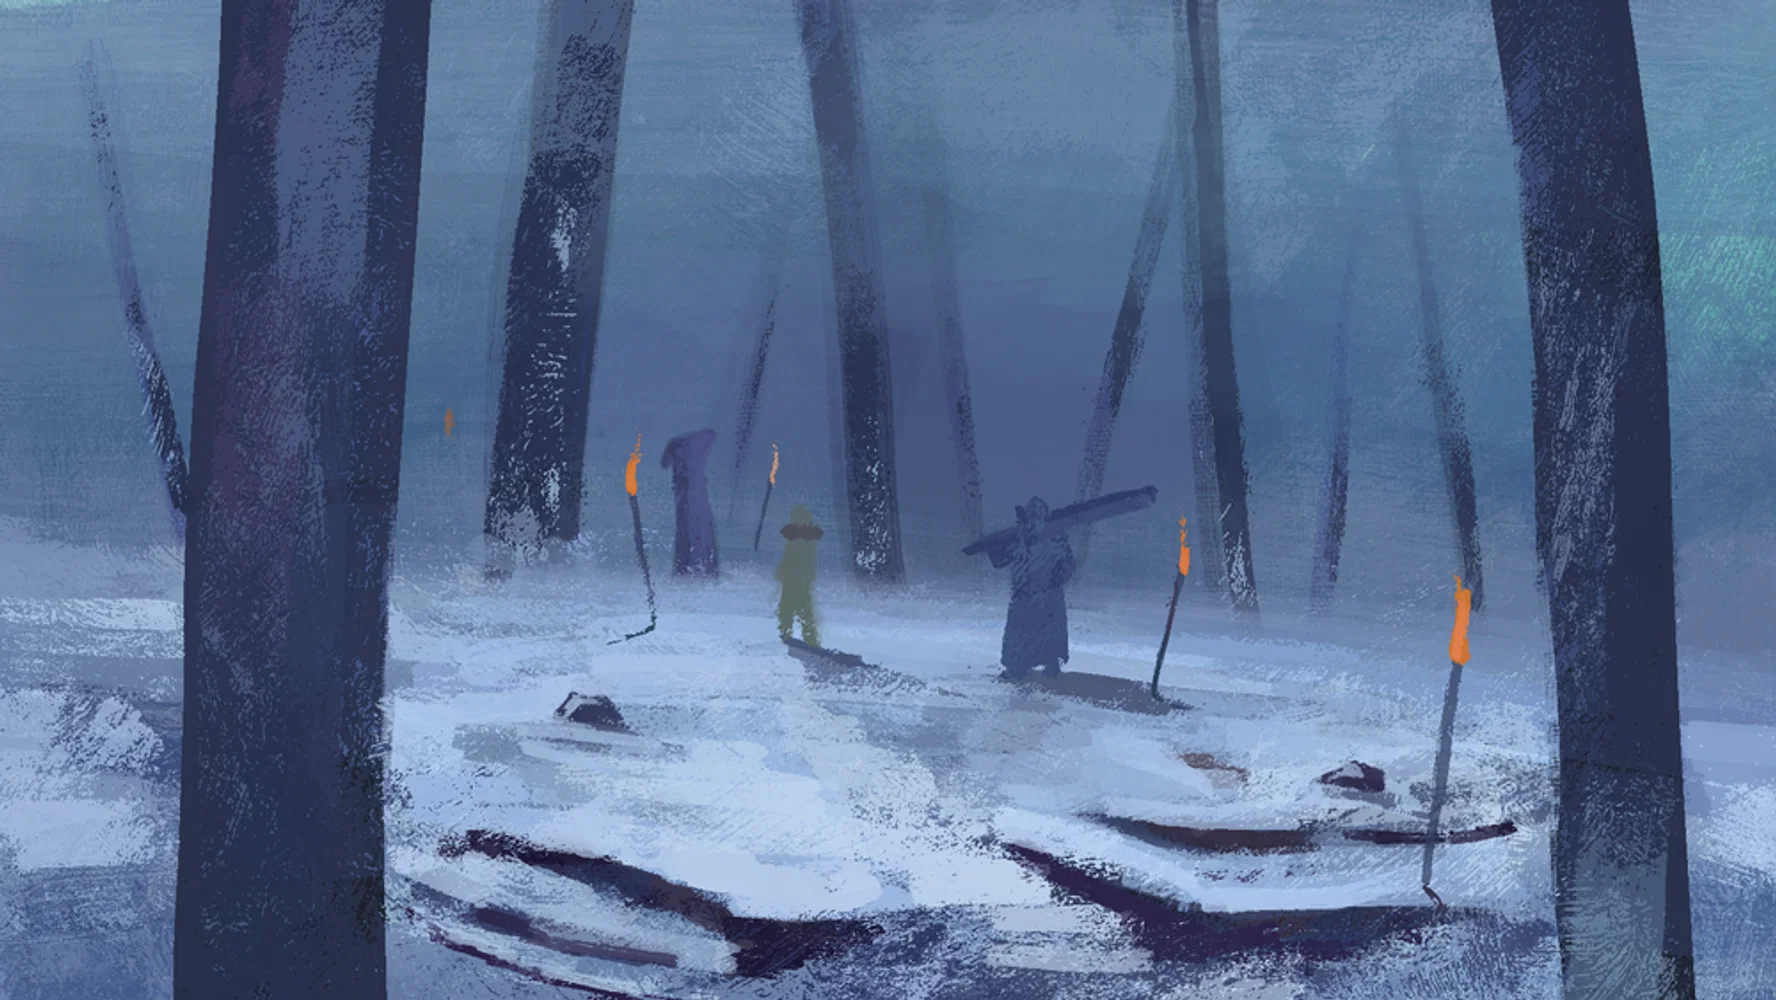 The Forest of Silence is a treacherous, cold place of the North. Though there are torches to light the way out, it is filled with dark fog that distracts the traveler and invites them to be lost for hours.